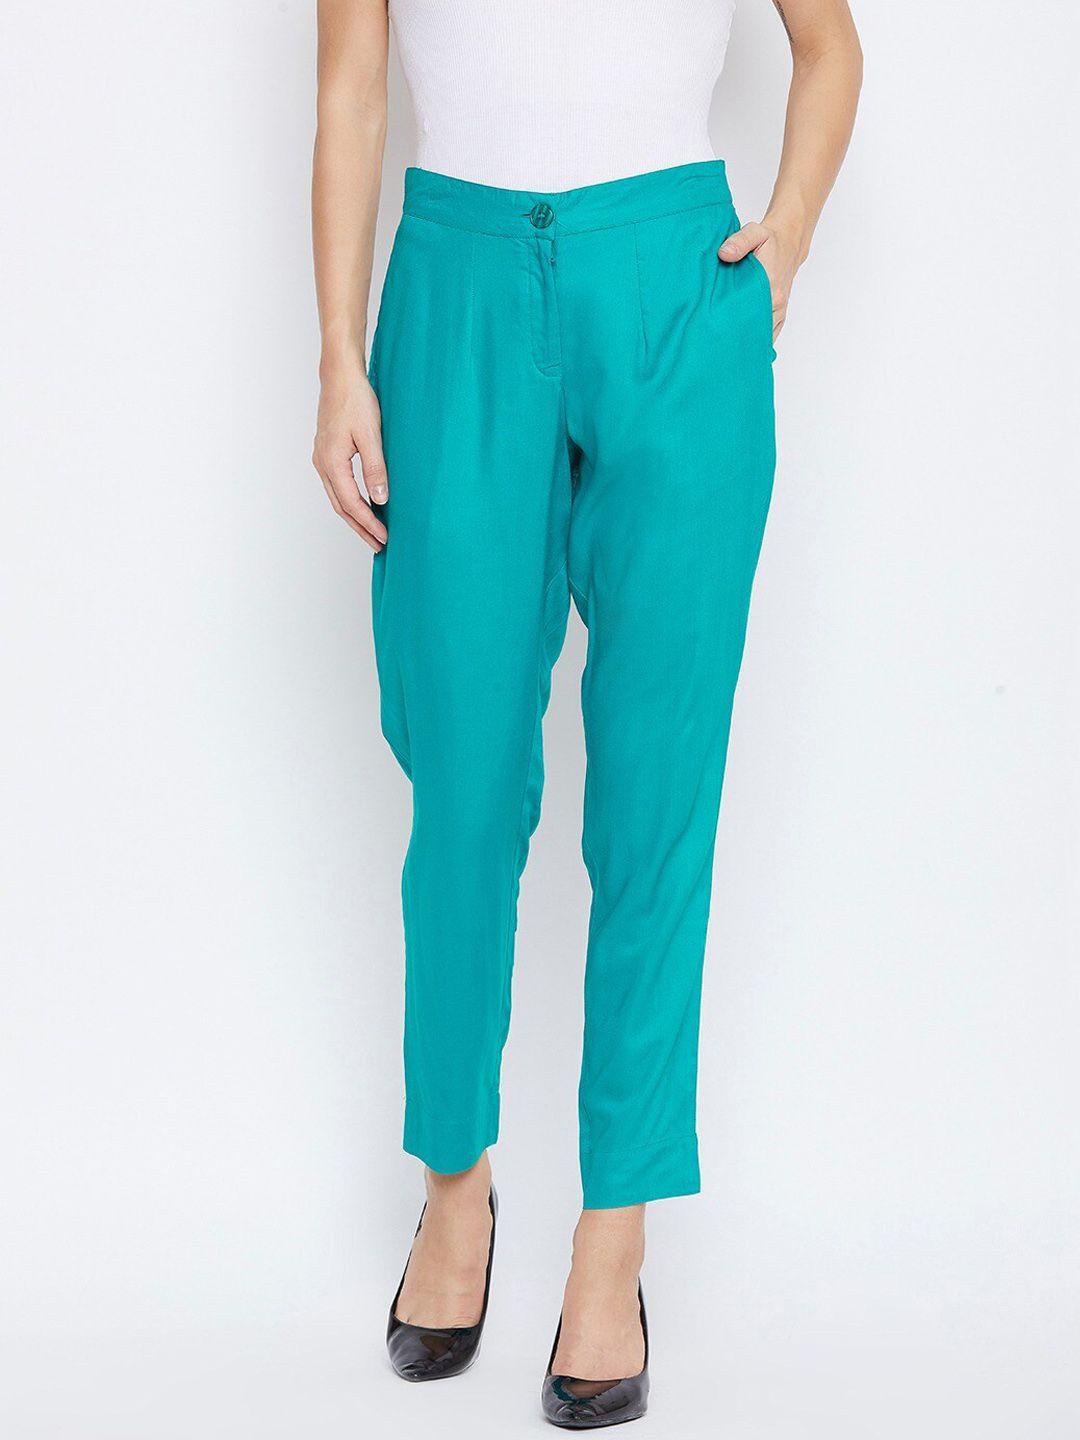 fabglobal women teal slim fit trousers